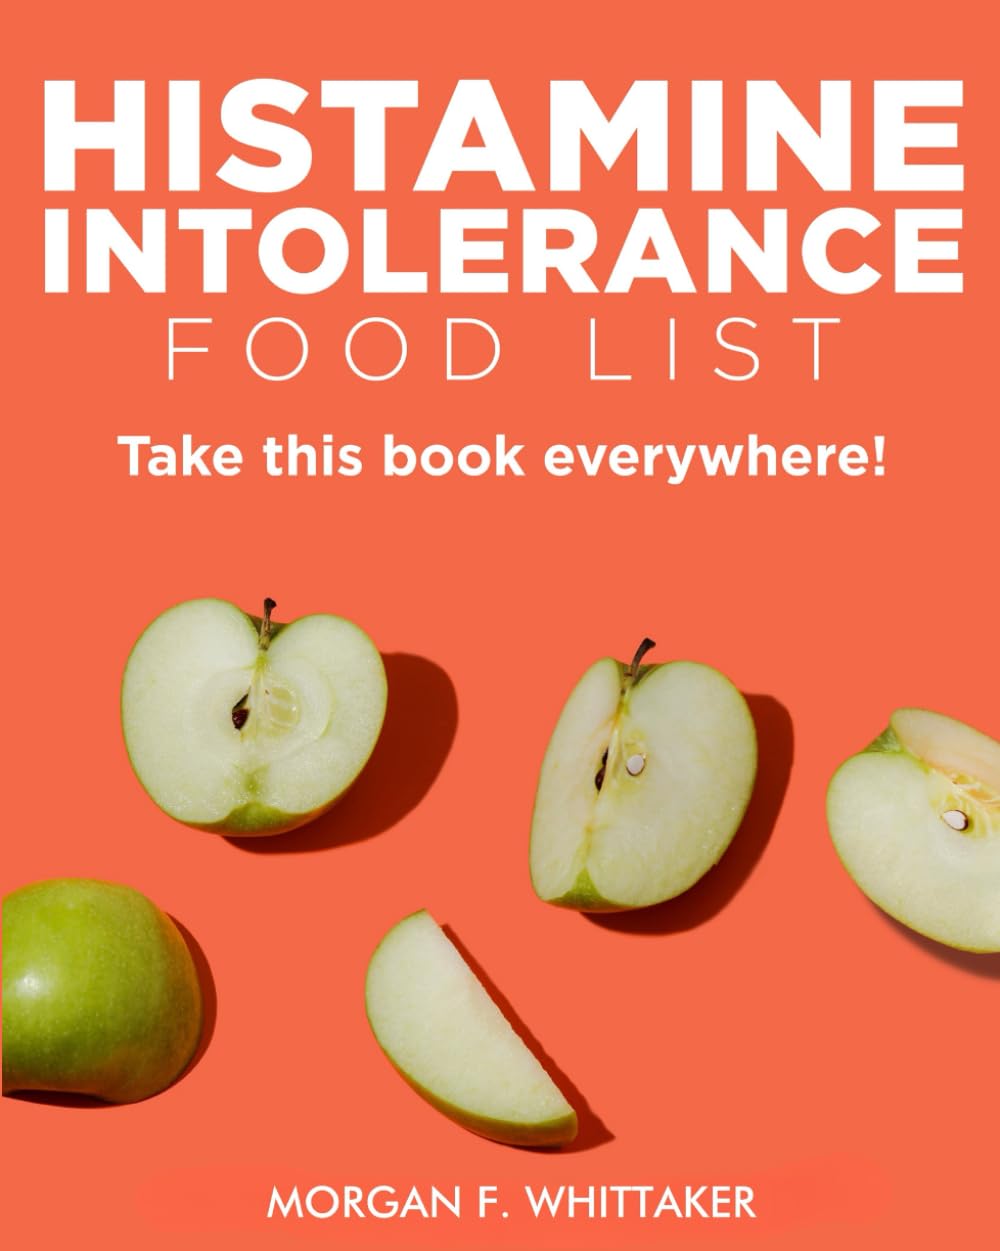 Histamine Intolerance Food List: The World’s Most Comprehensive Low-Histamine Ingredient List - Take It Wherever You Go! (Food Heroes)